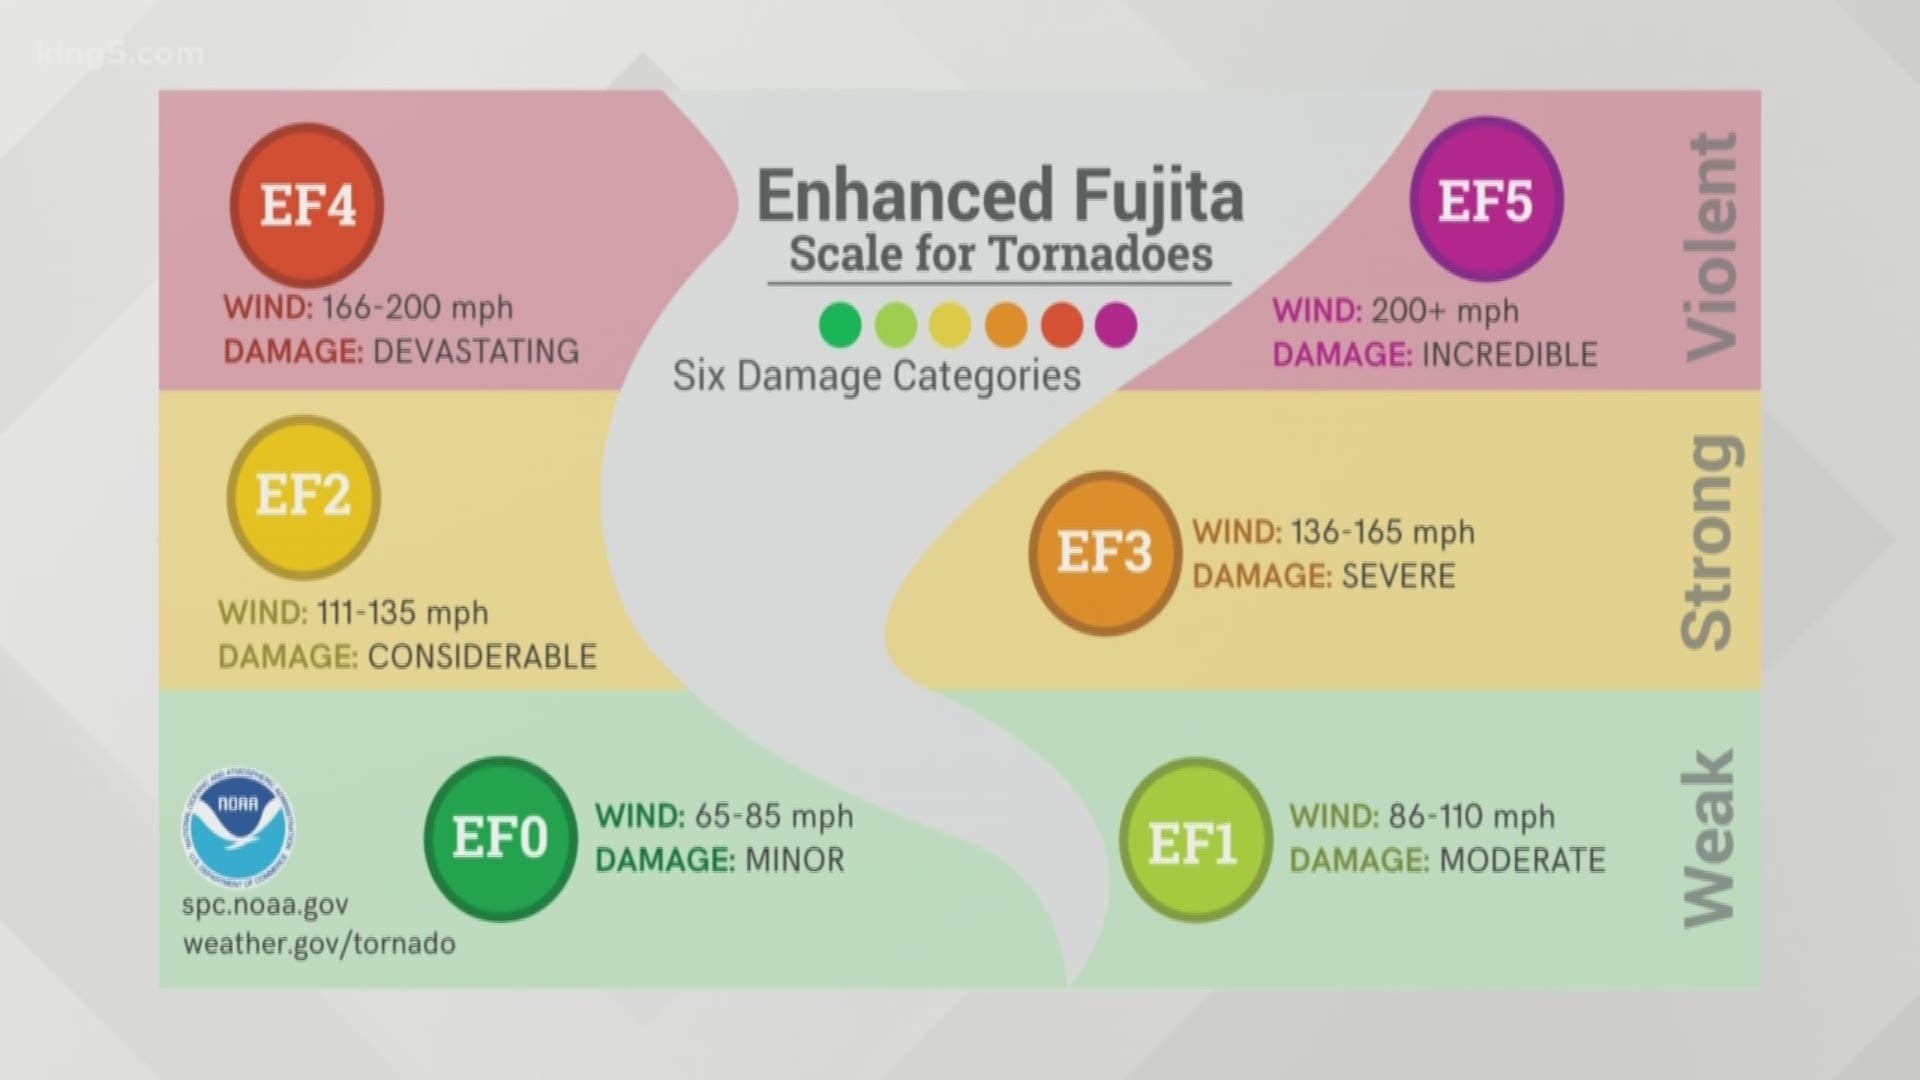 Experts use the "Enhanced Fujita Scale" to determine just how powerful the storm was.